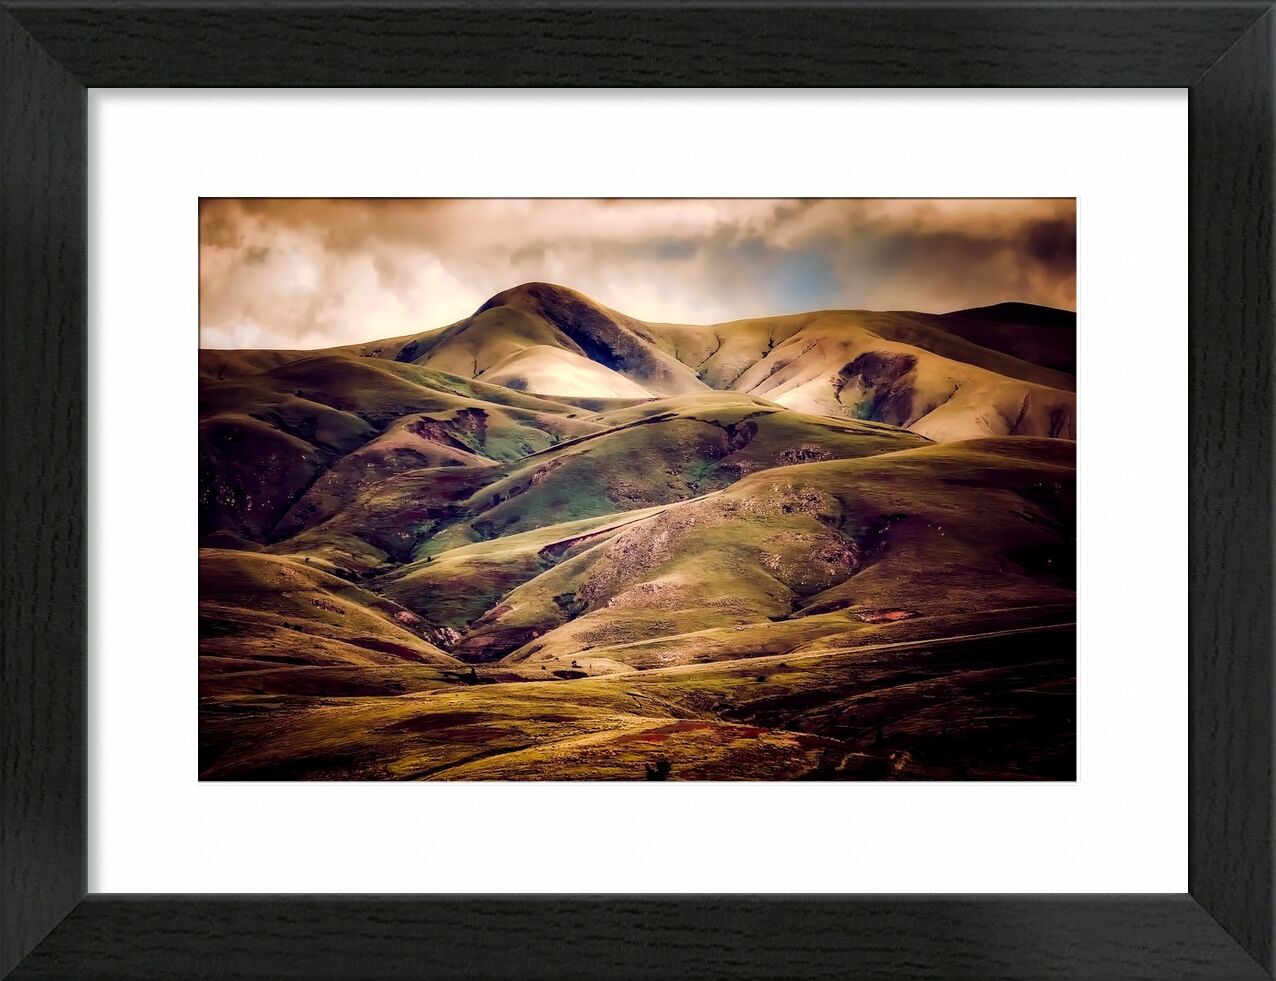 Hilly landscape from Pierre Gaultier, Prodi Art, iceland, mountains, sky, clouds, nature, outdoors, landscape, hills, country, countryside, sunset, sunrise